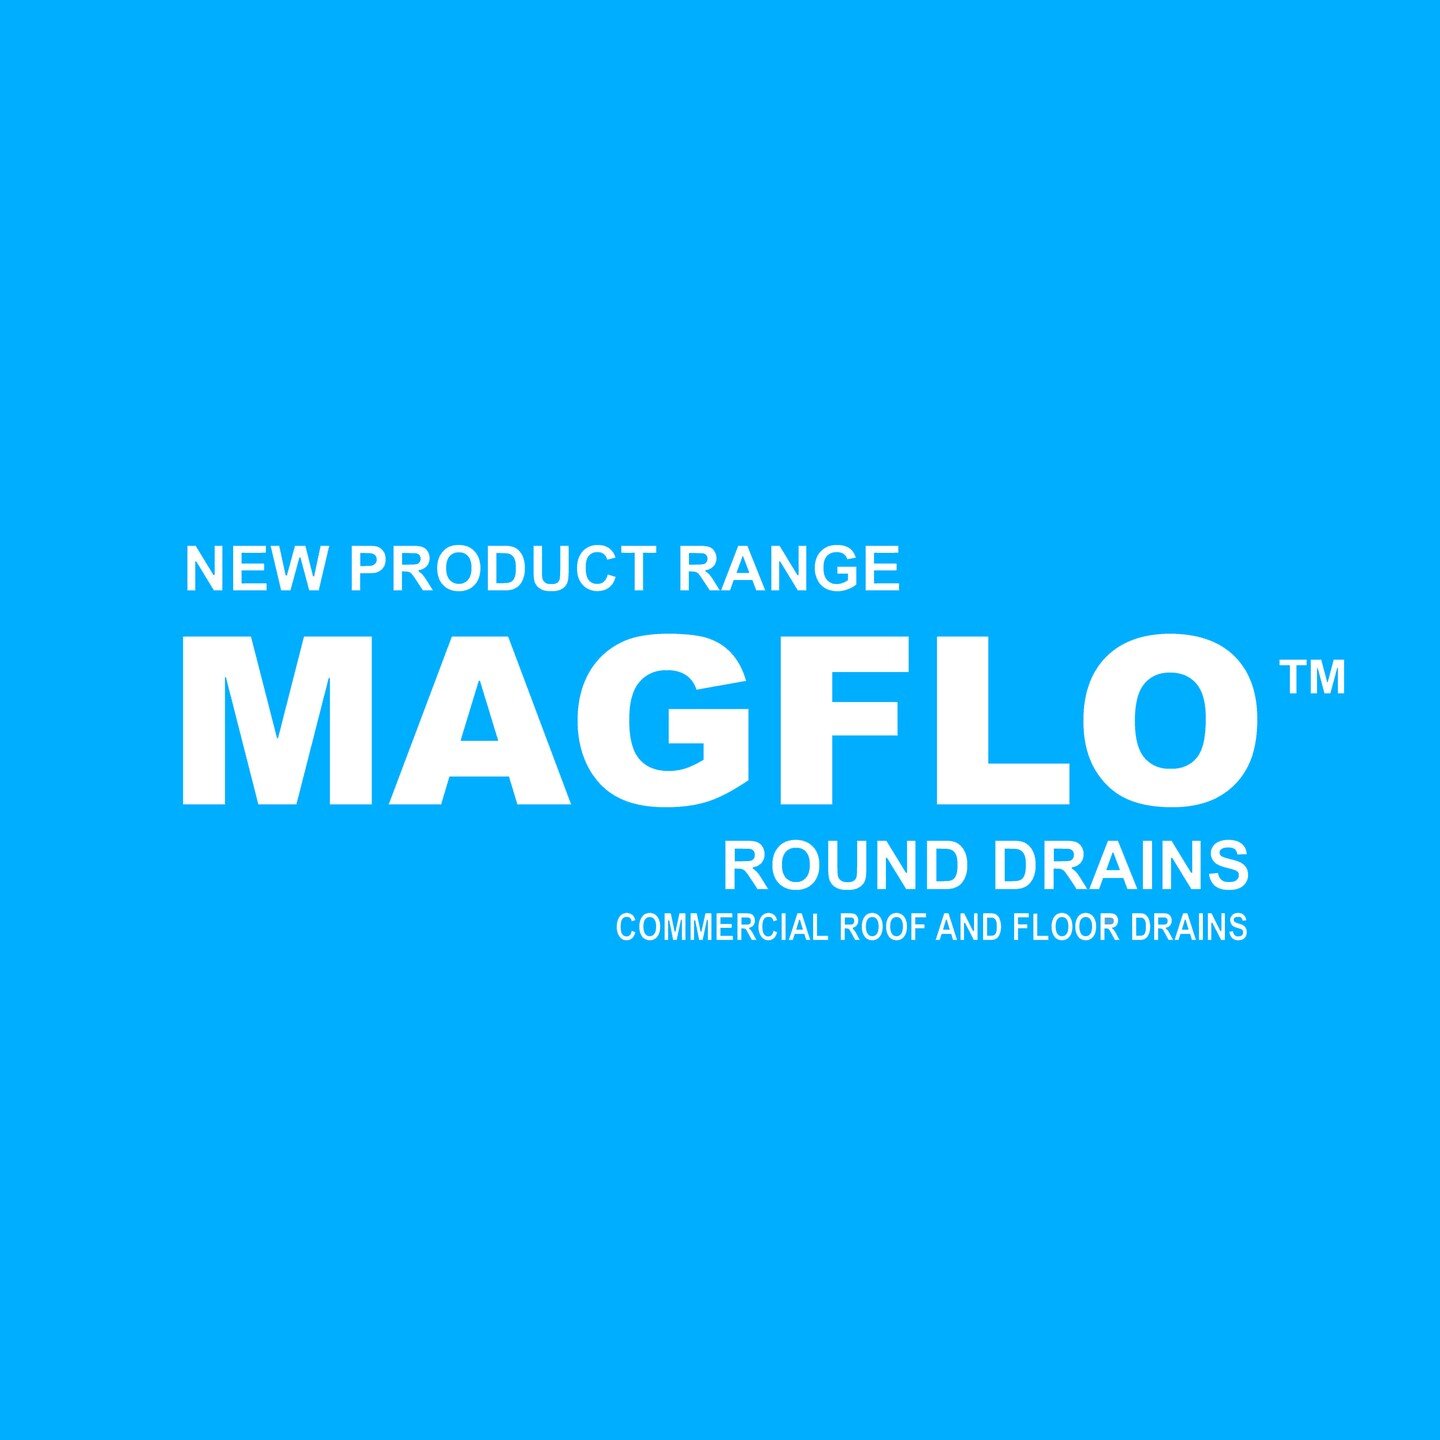 Introducing our new extensive product range MAGFLO&trade;, starting with our commercial roof and floor drains. Now available in different styles and suitable for multiple applications. 
Please refer to the catalog for specs; https://bit.ly/3D4wByK

C